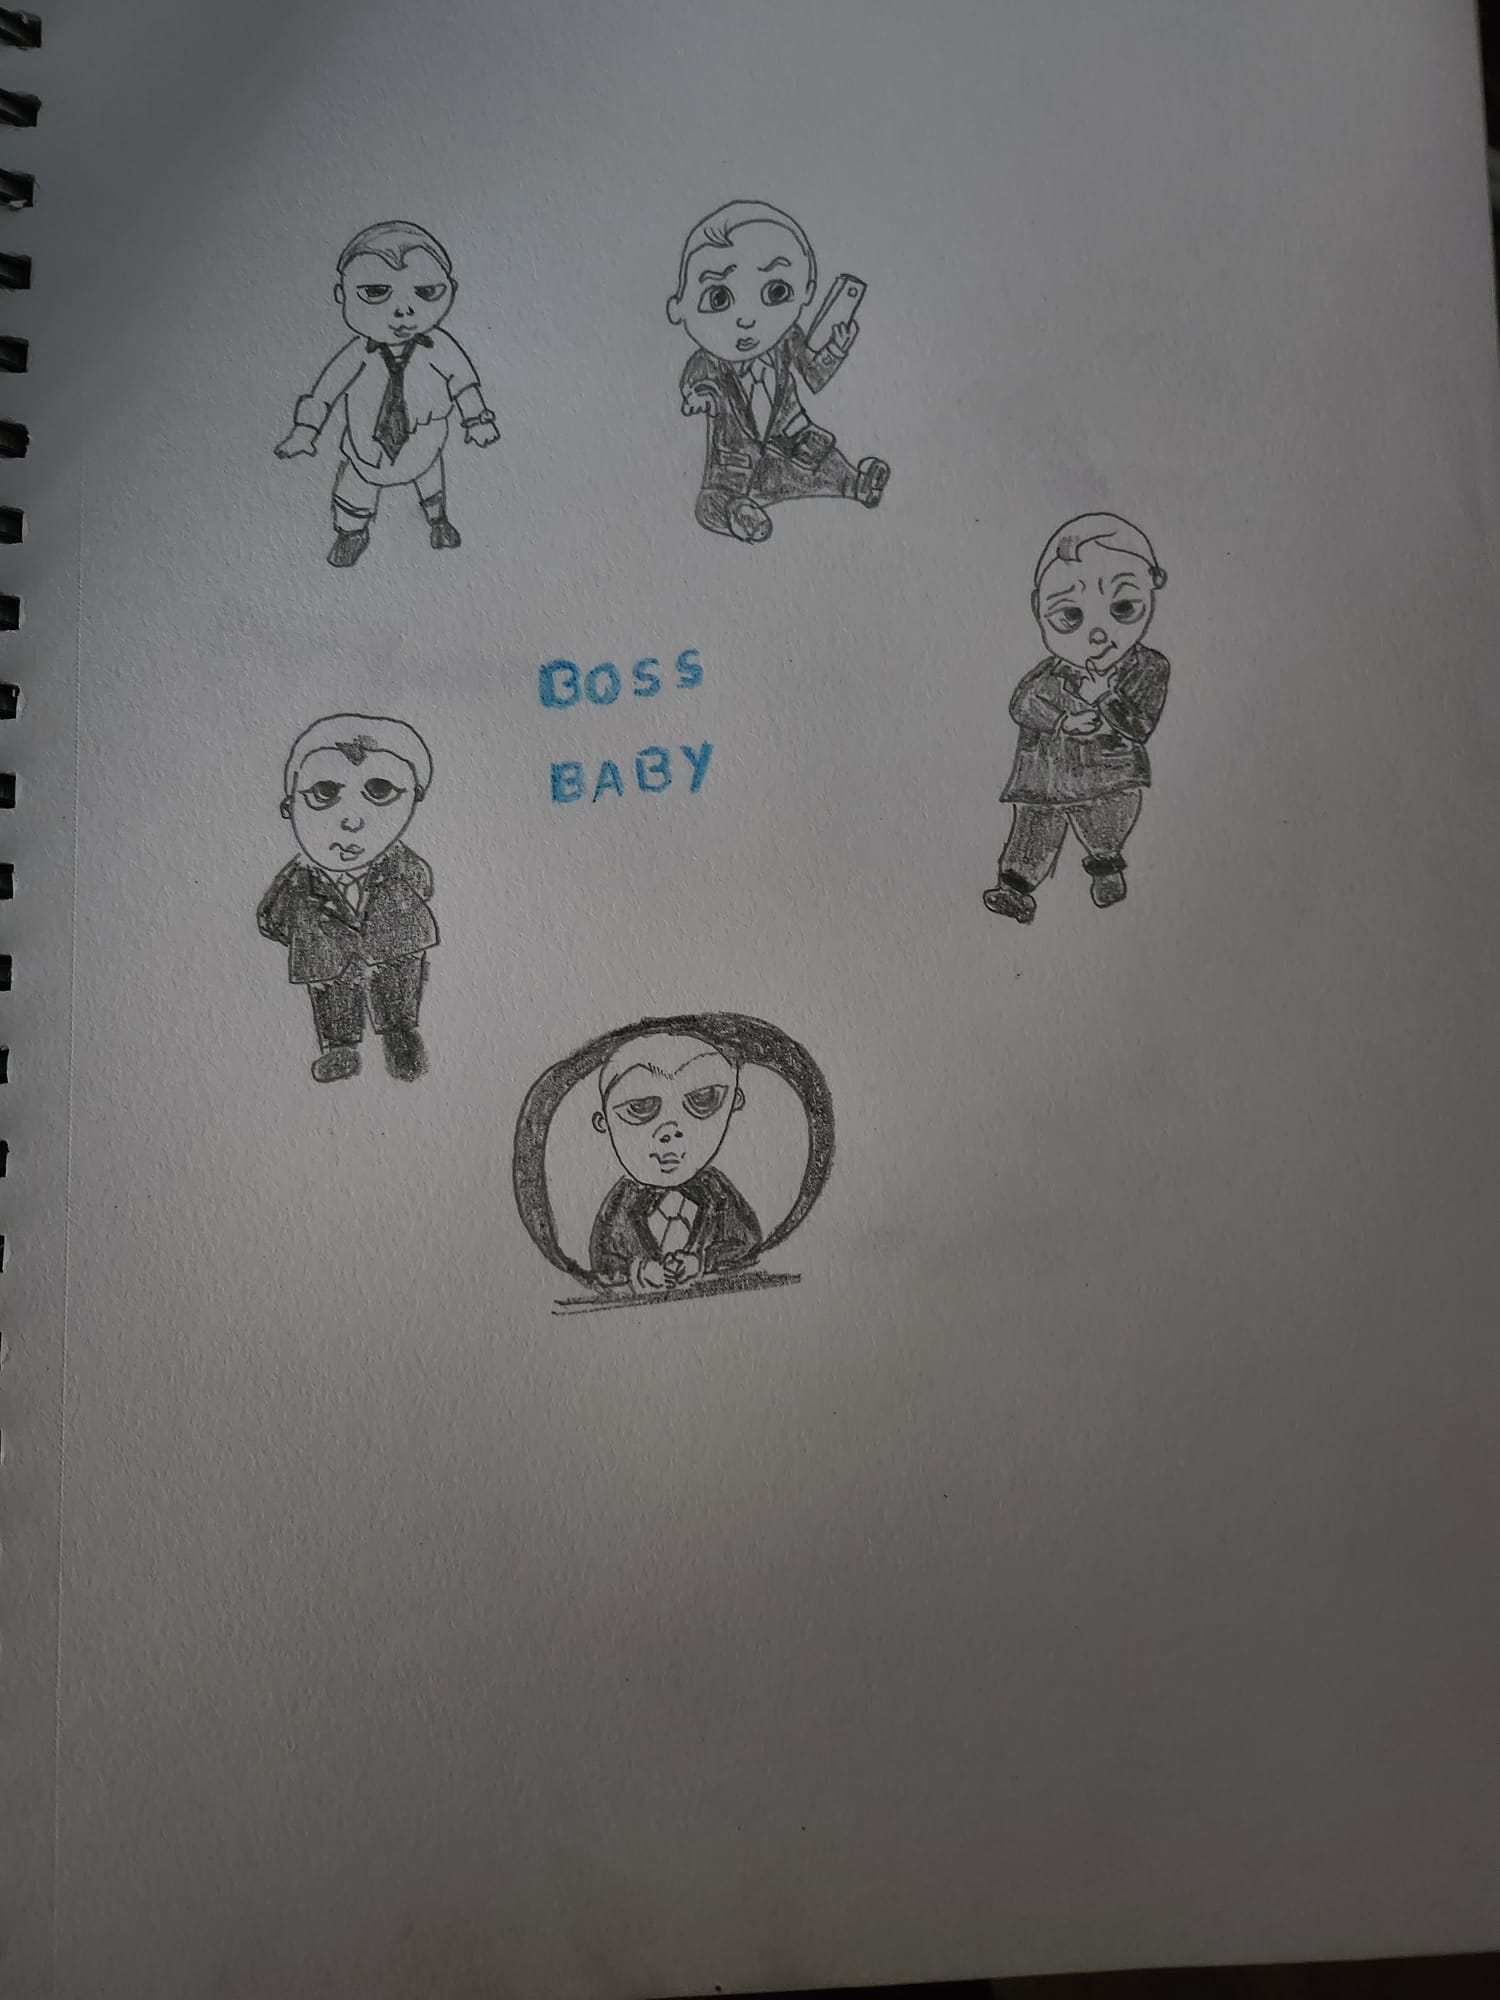 Learn How to Draw Baby Boss from The Boss Baby (The Boss Baby) Step by Step  : Drawing Tutori… | Bebe desenho, Coisas simples para desenhar, Desenhos  animais simples